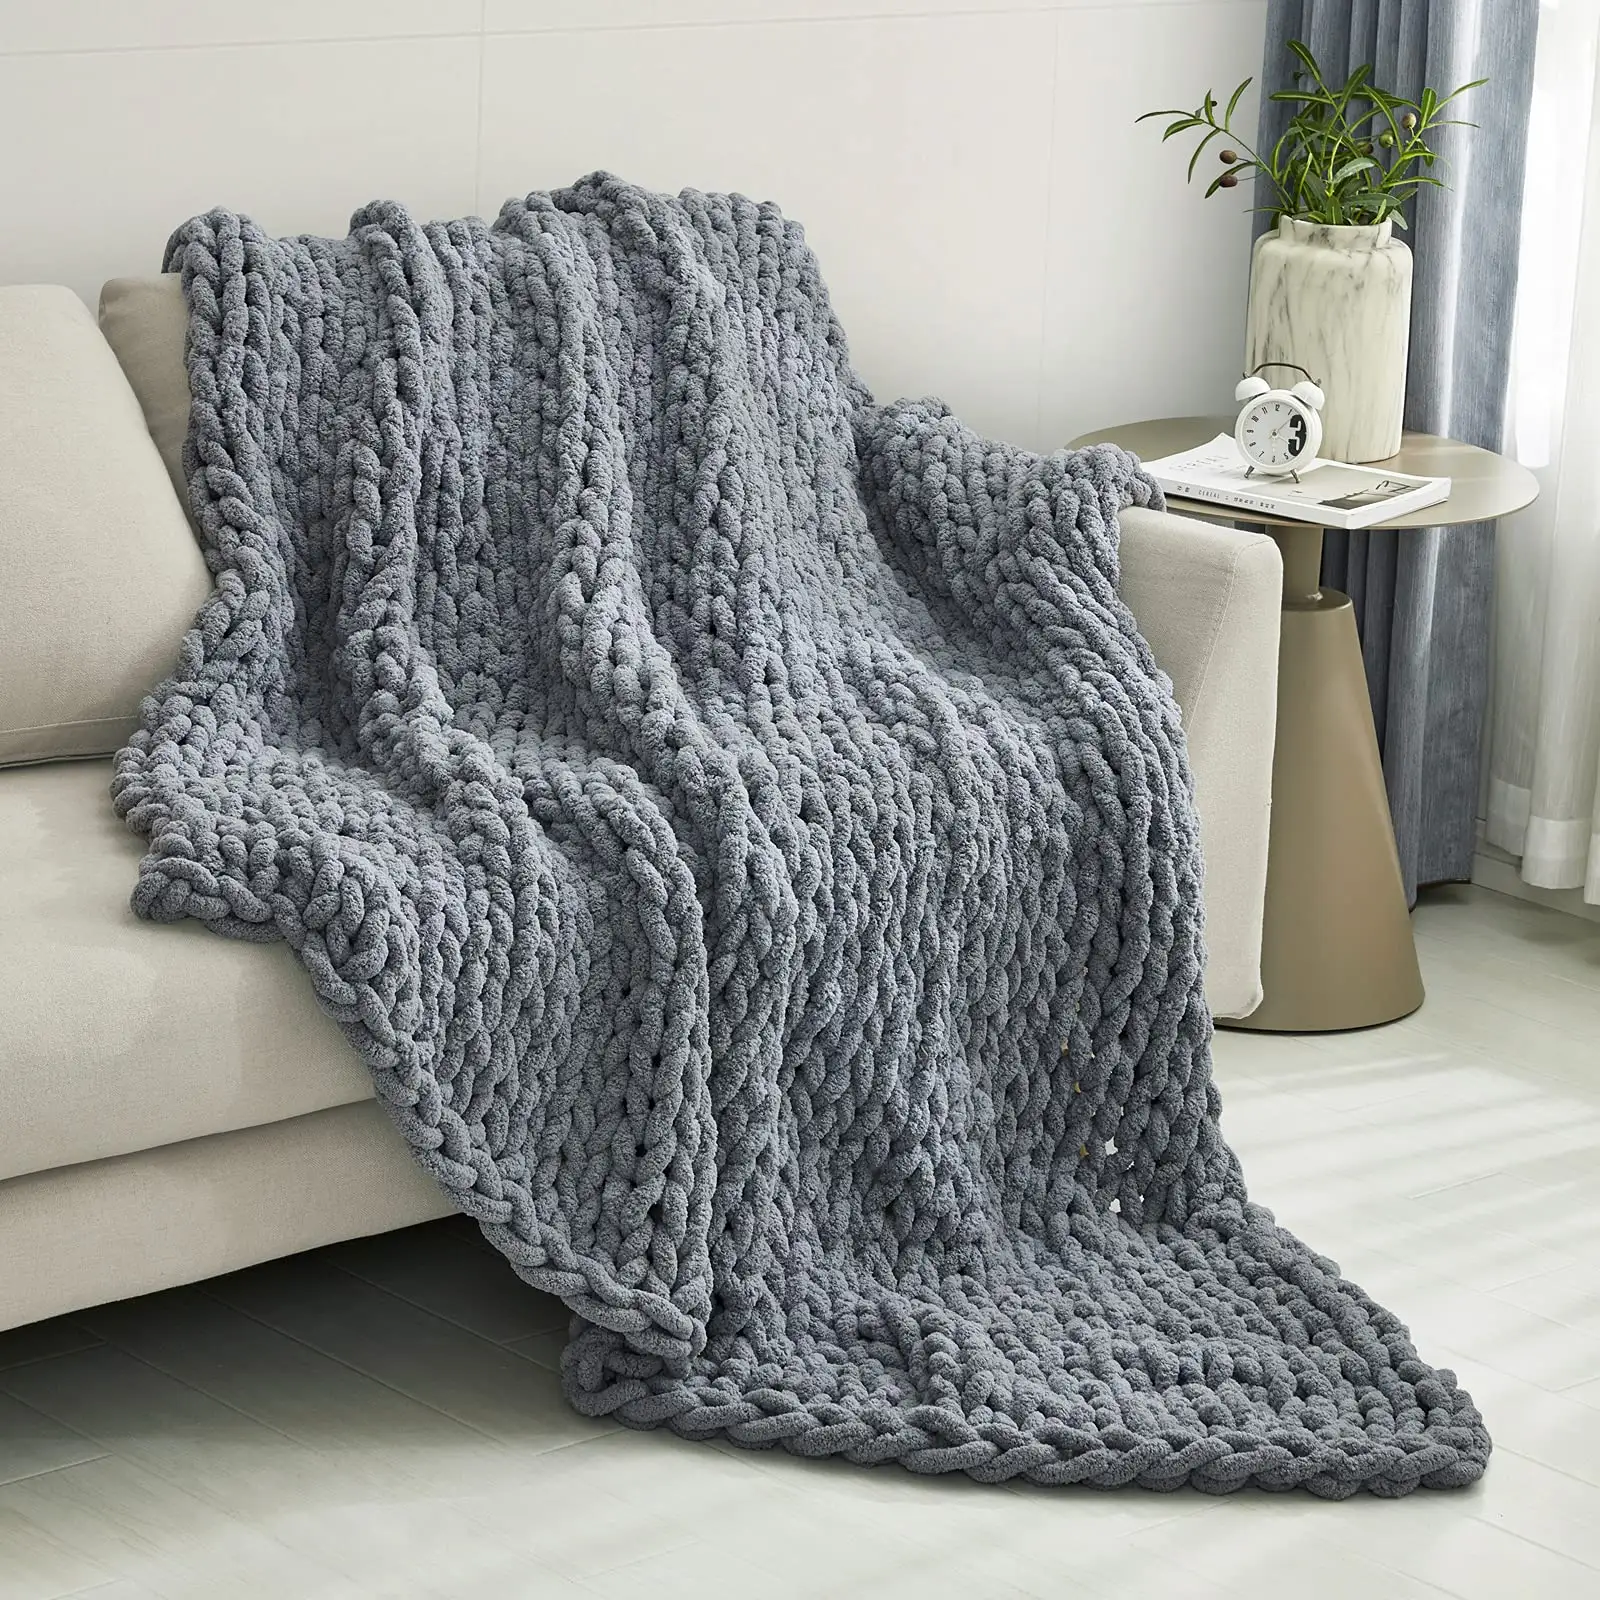 Luxury Soft Cozy Large Throw Bed Blanket Machine Washable Chunky Knit Throw Blanket For Couch Sofa Home Decor